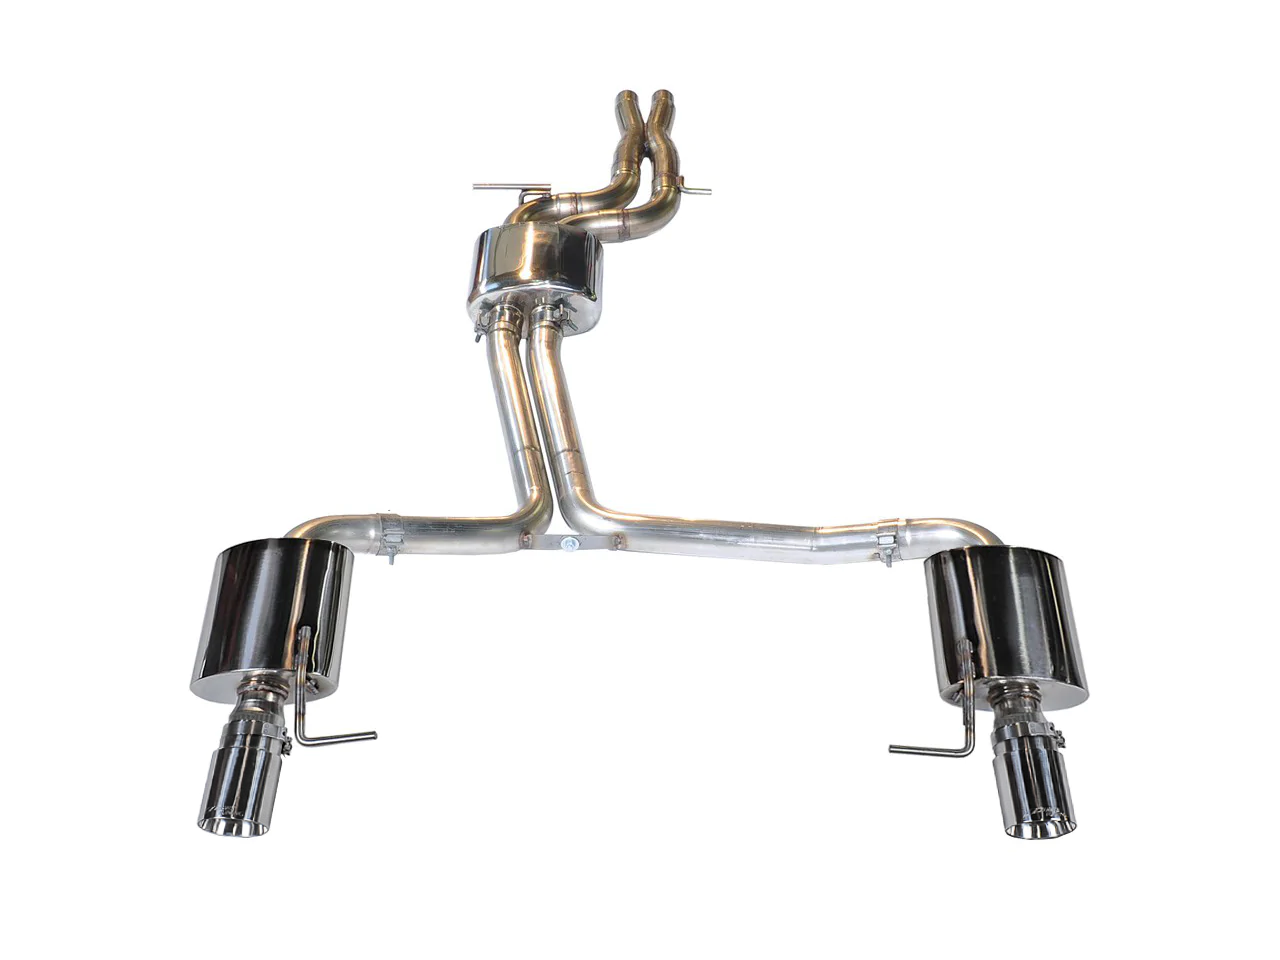 AWE Exhaust Suite for Audi C7 A6